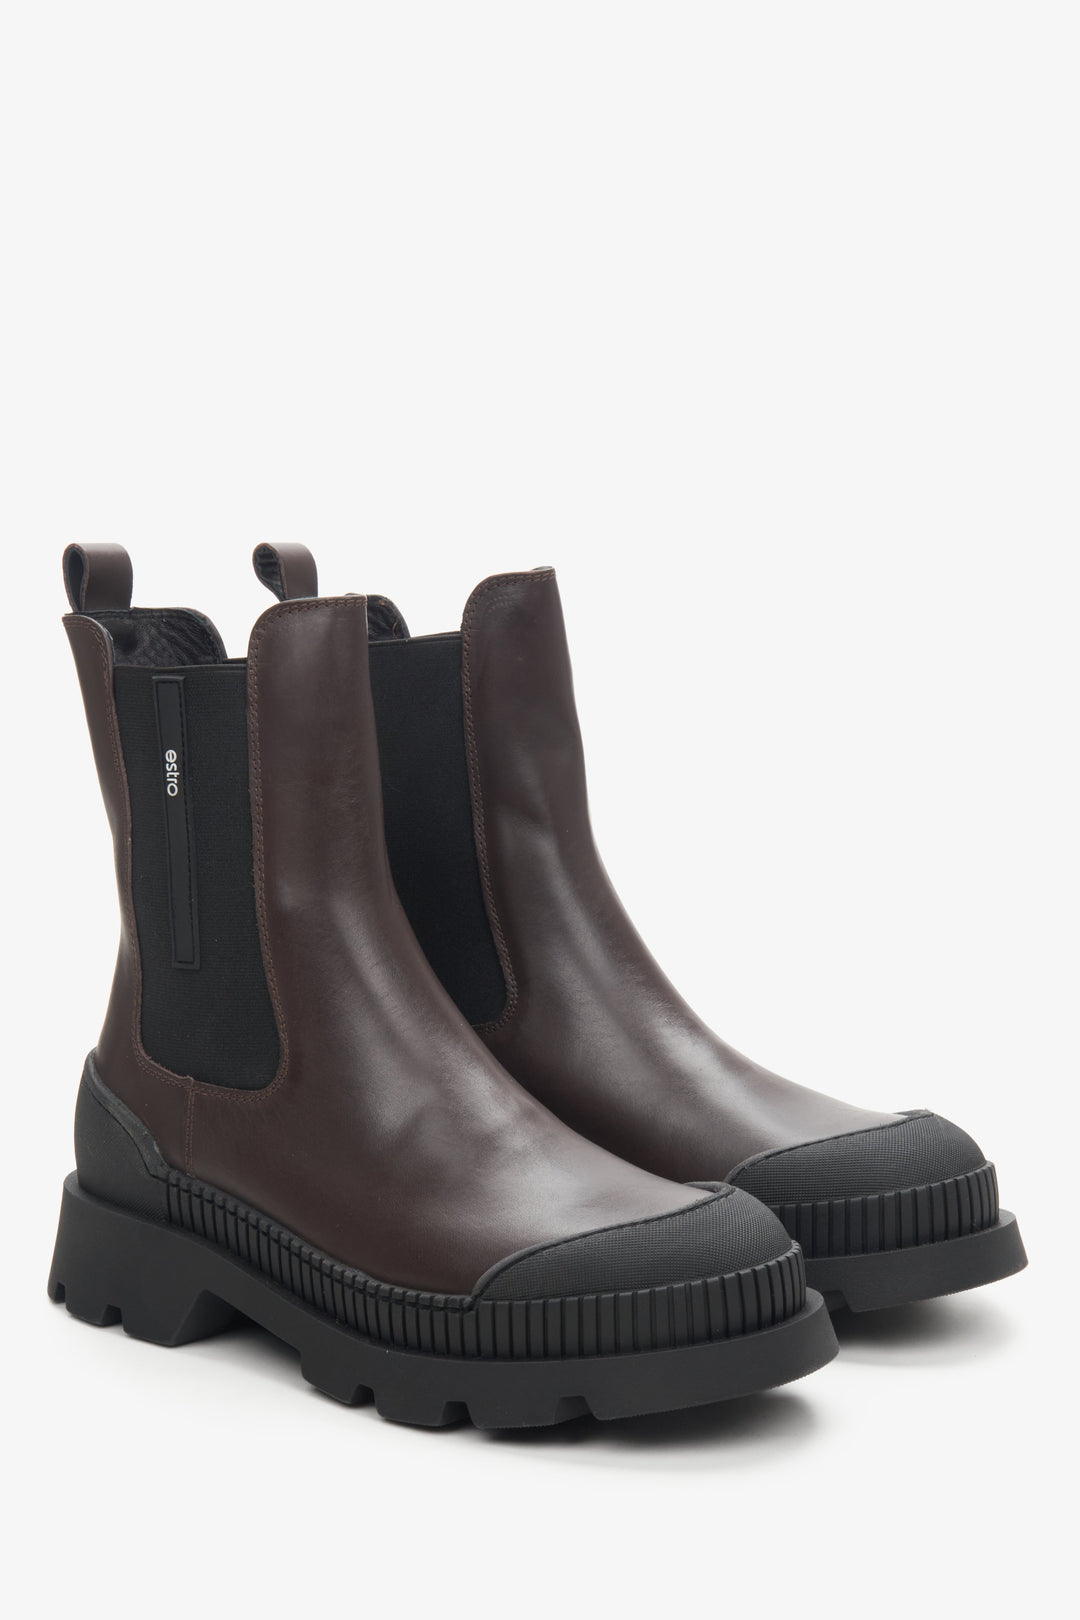 Brown and black leather Estro women's Chelsea boots.